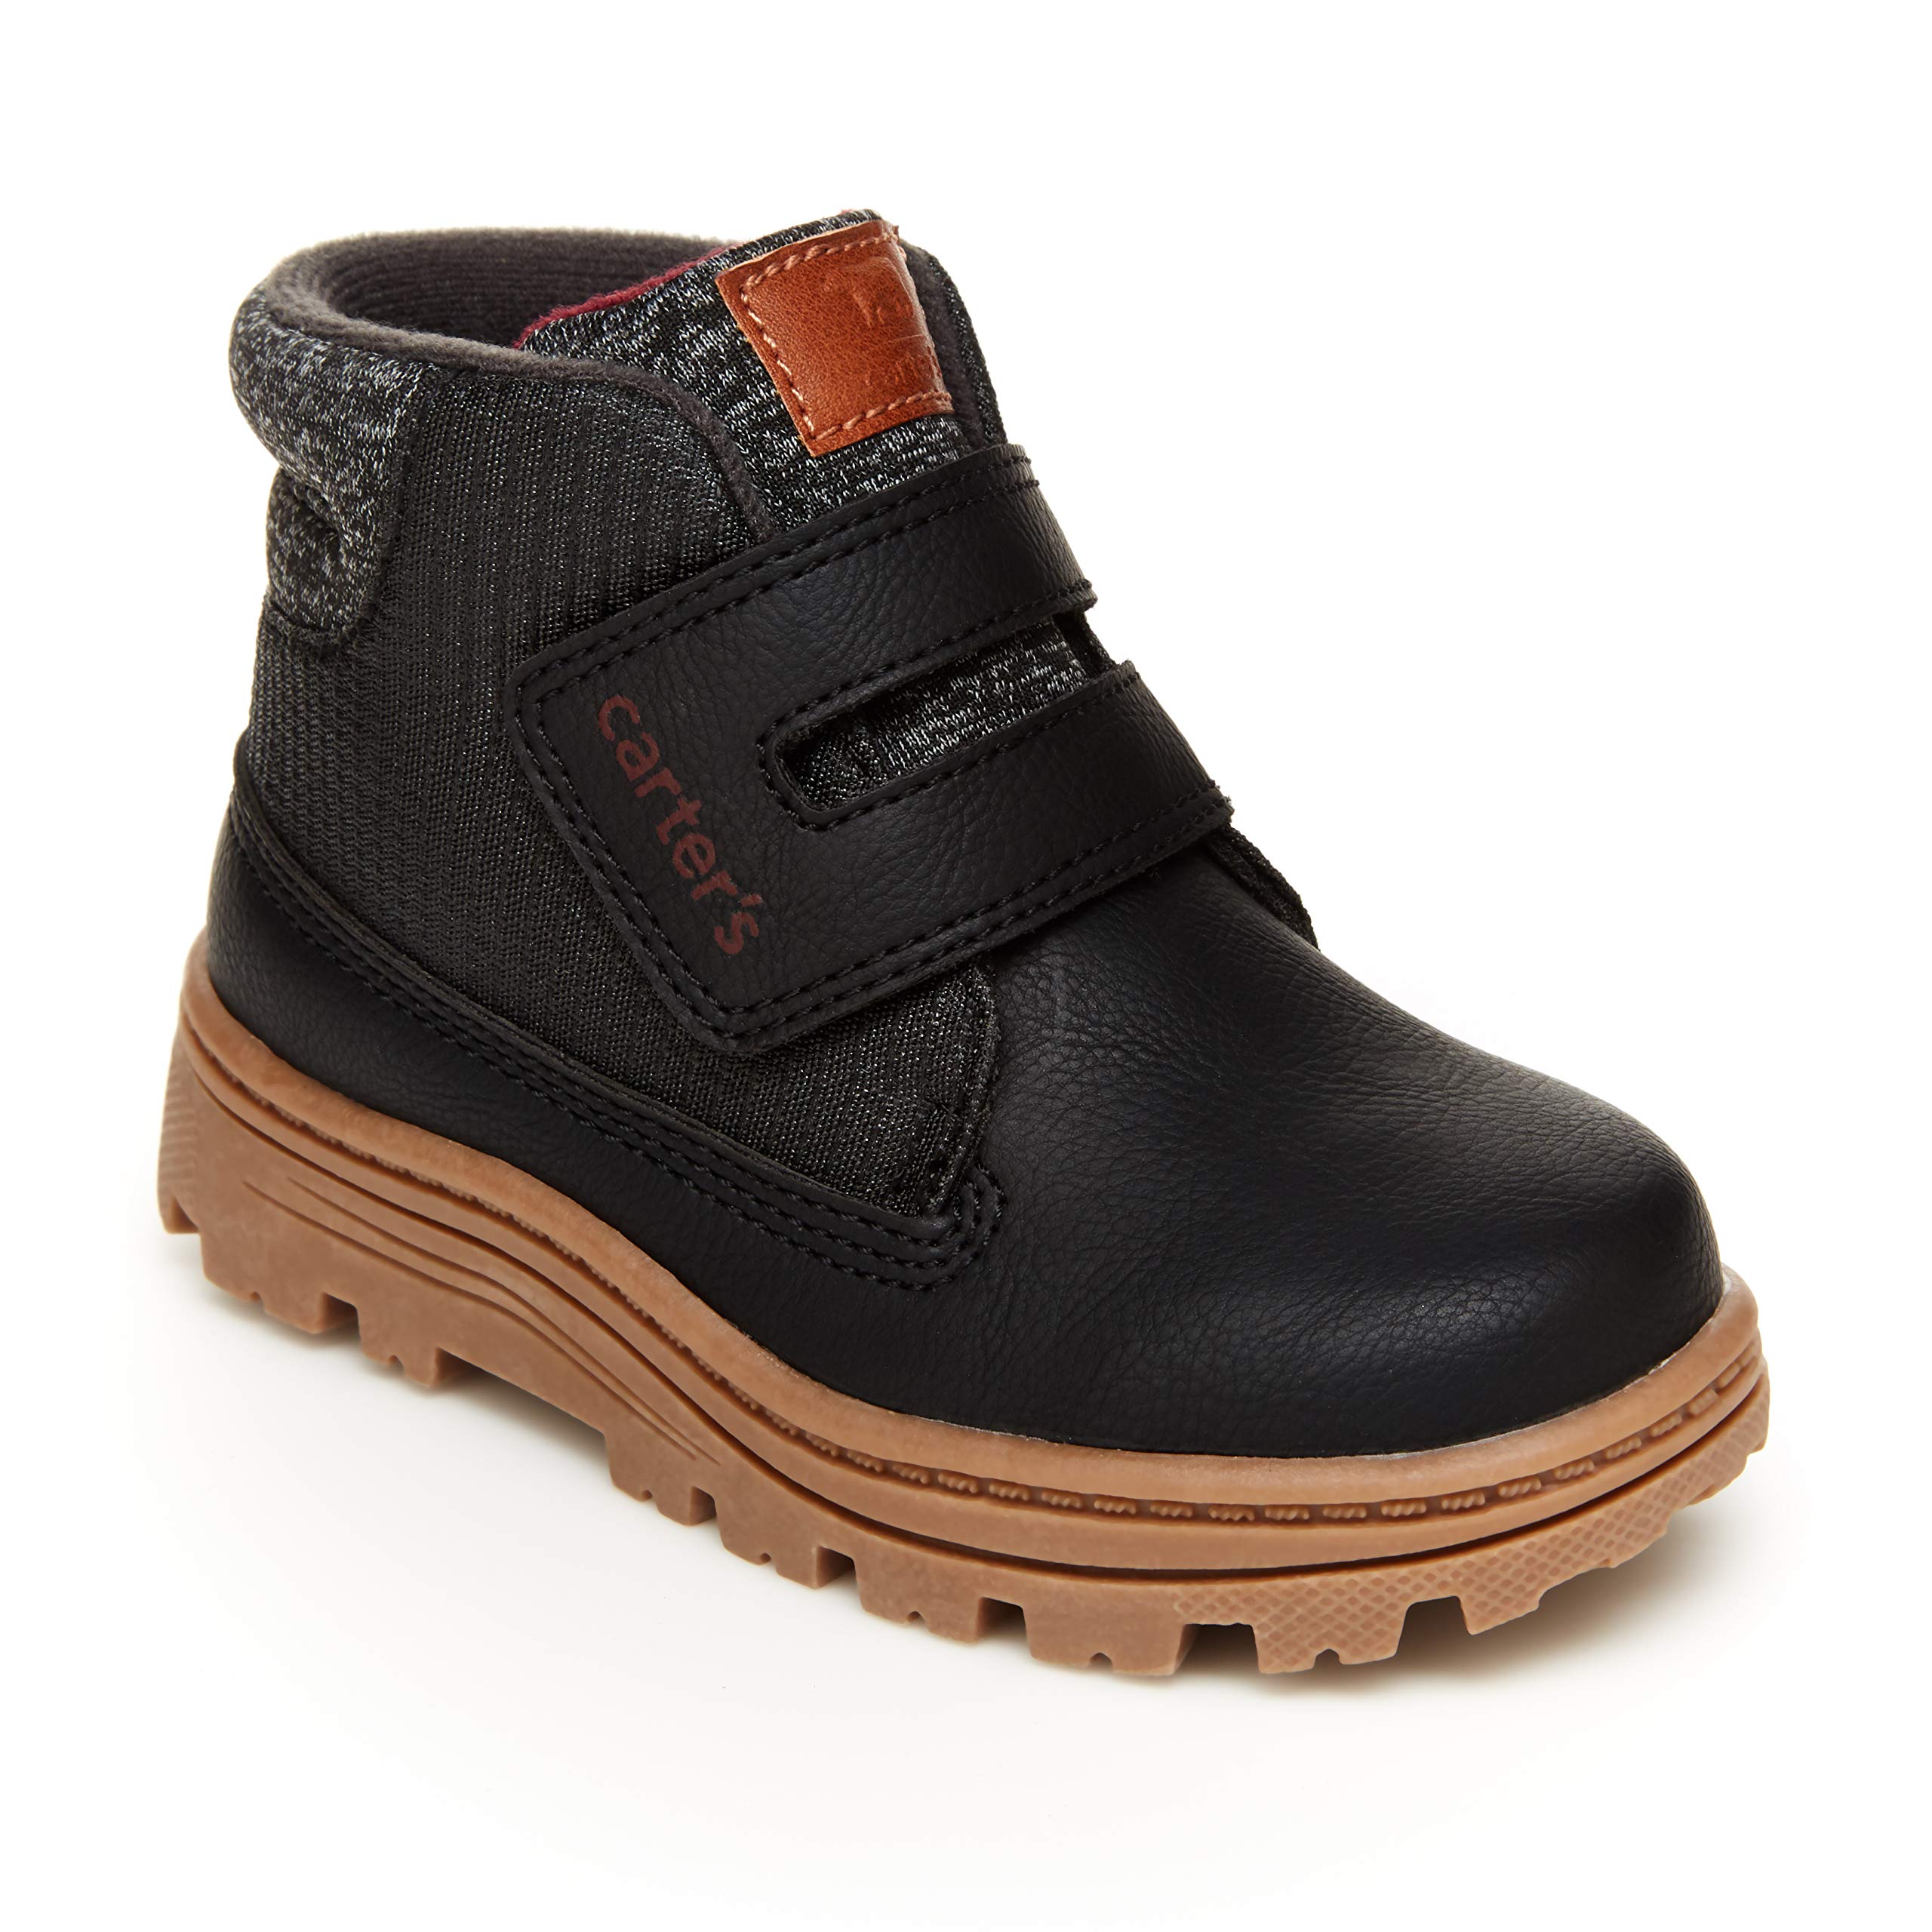 Carter's Boy's Kelso Fashion Boot